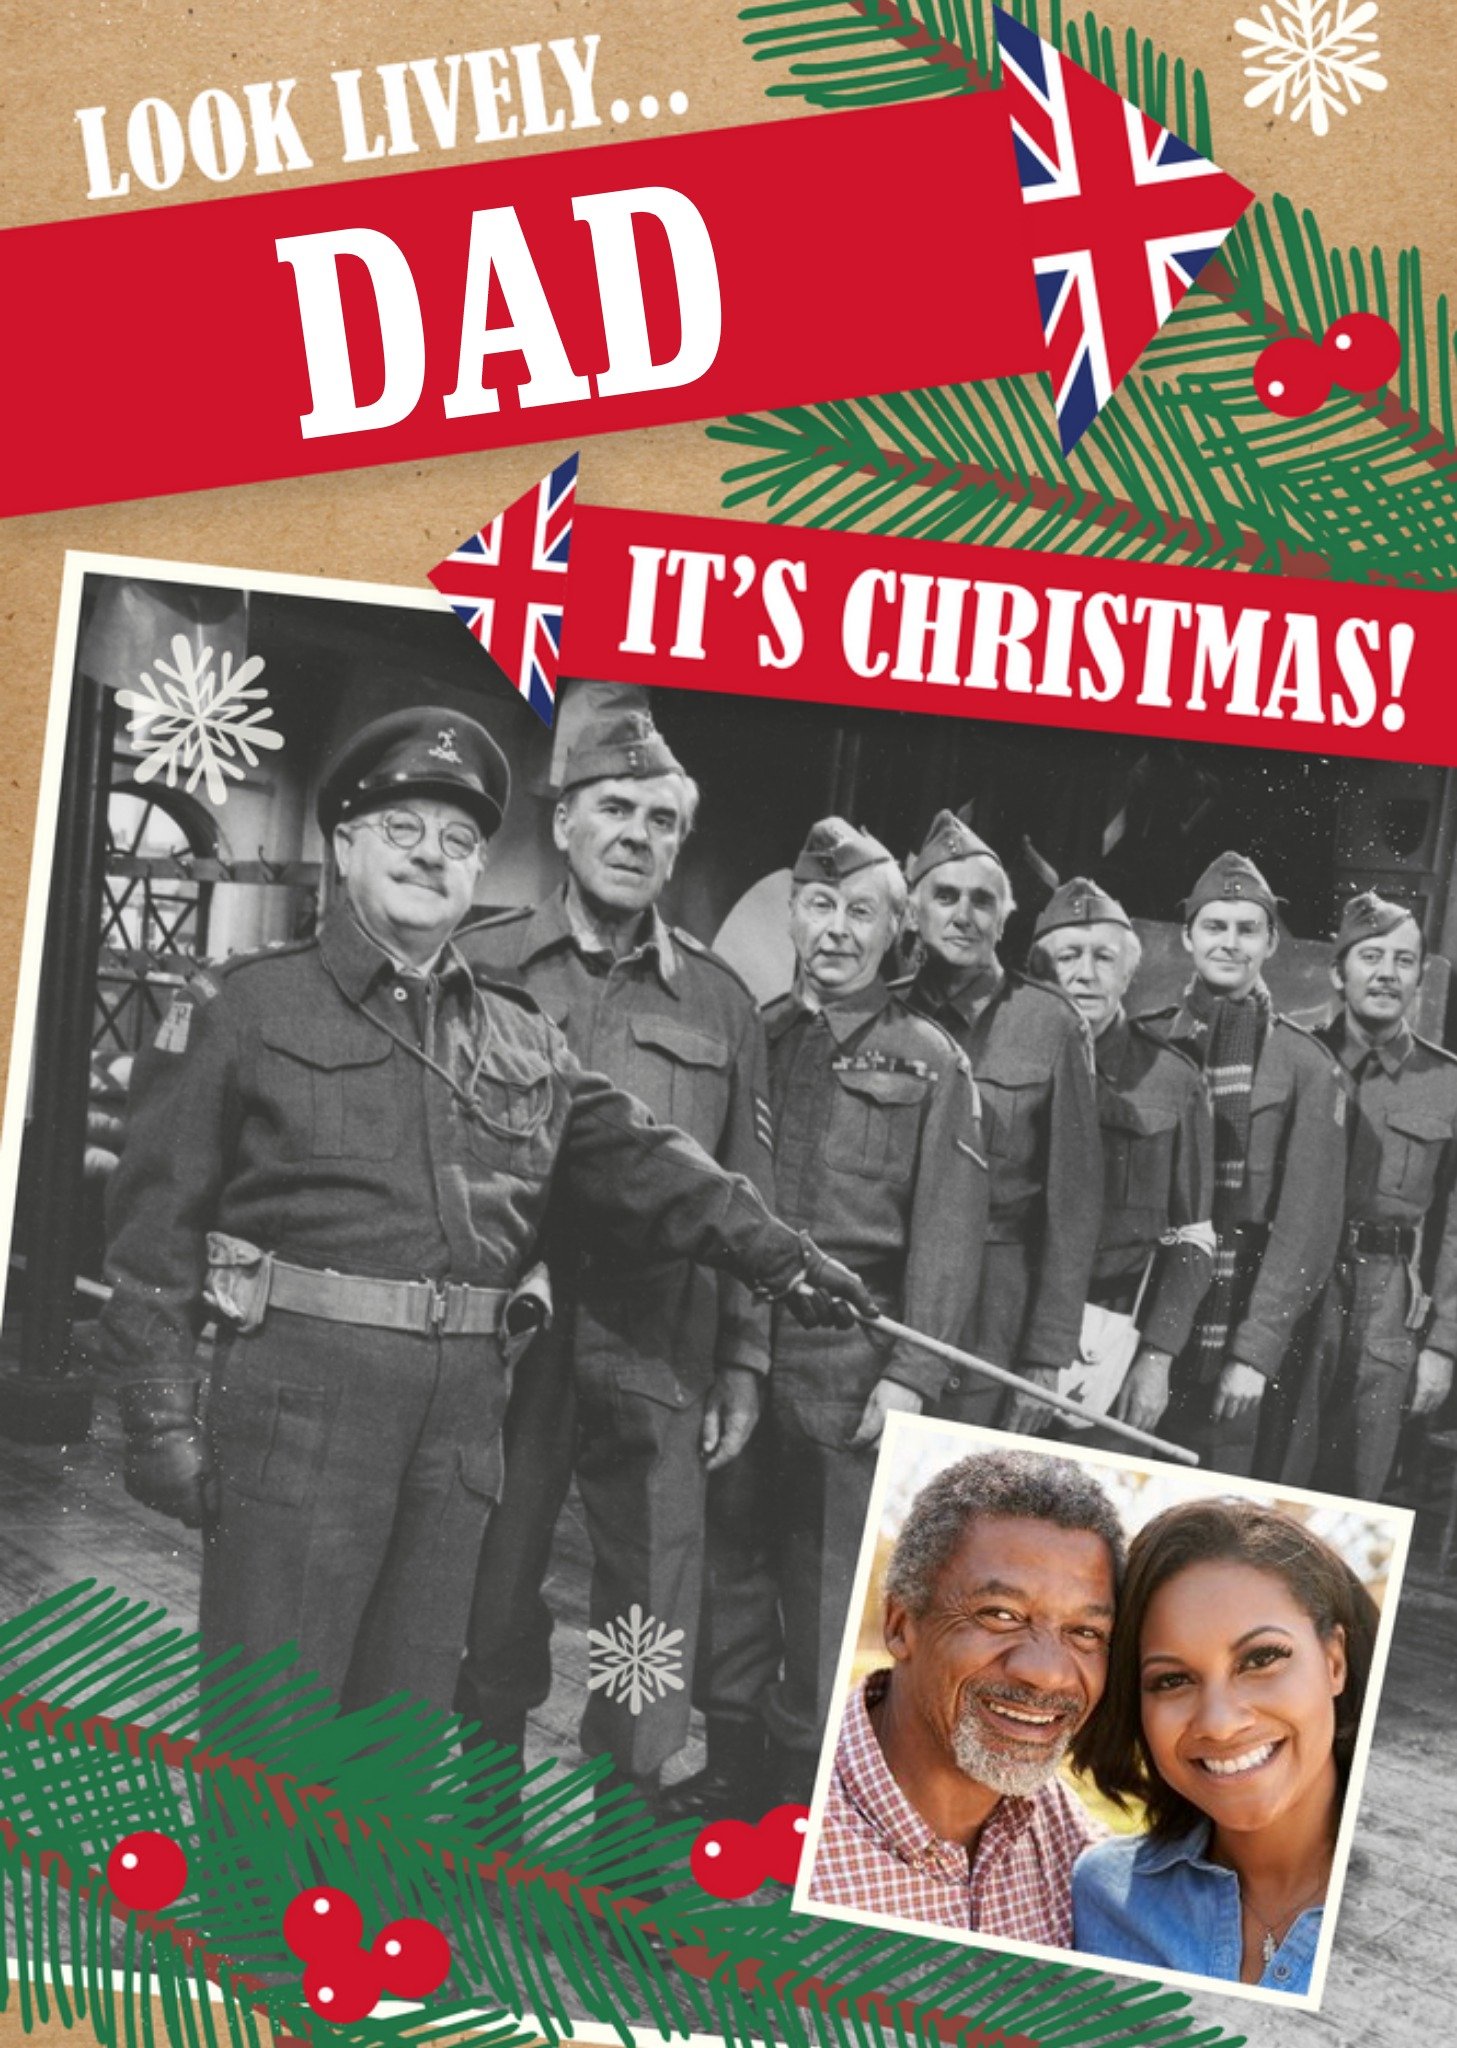 Retro Humour Dad's Army Look Lively Dad Photo Upload Christmas Card Ecard